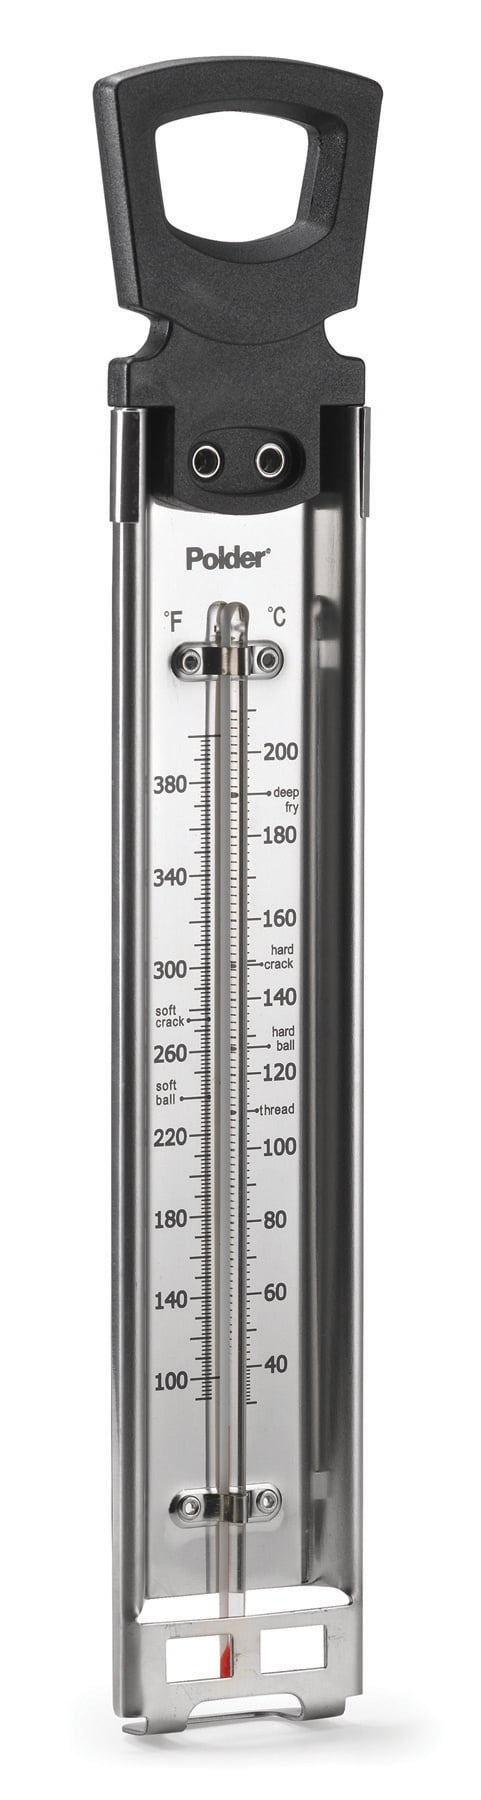 Polder Candy/Jelly/Deep Fry Thermometer Stainless Steel with Pot Clip